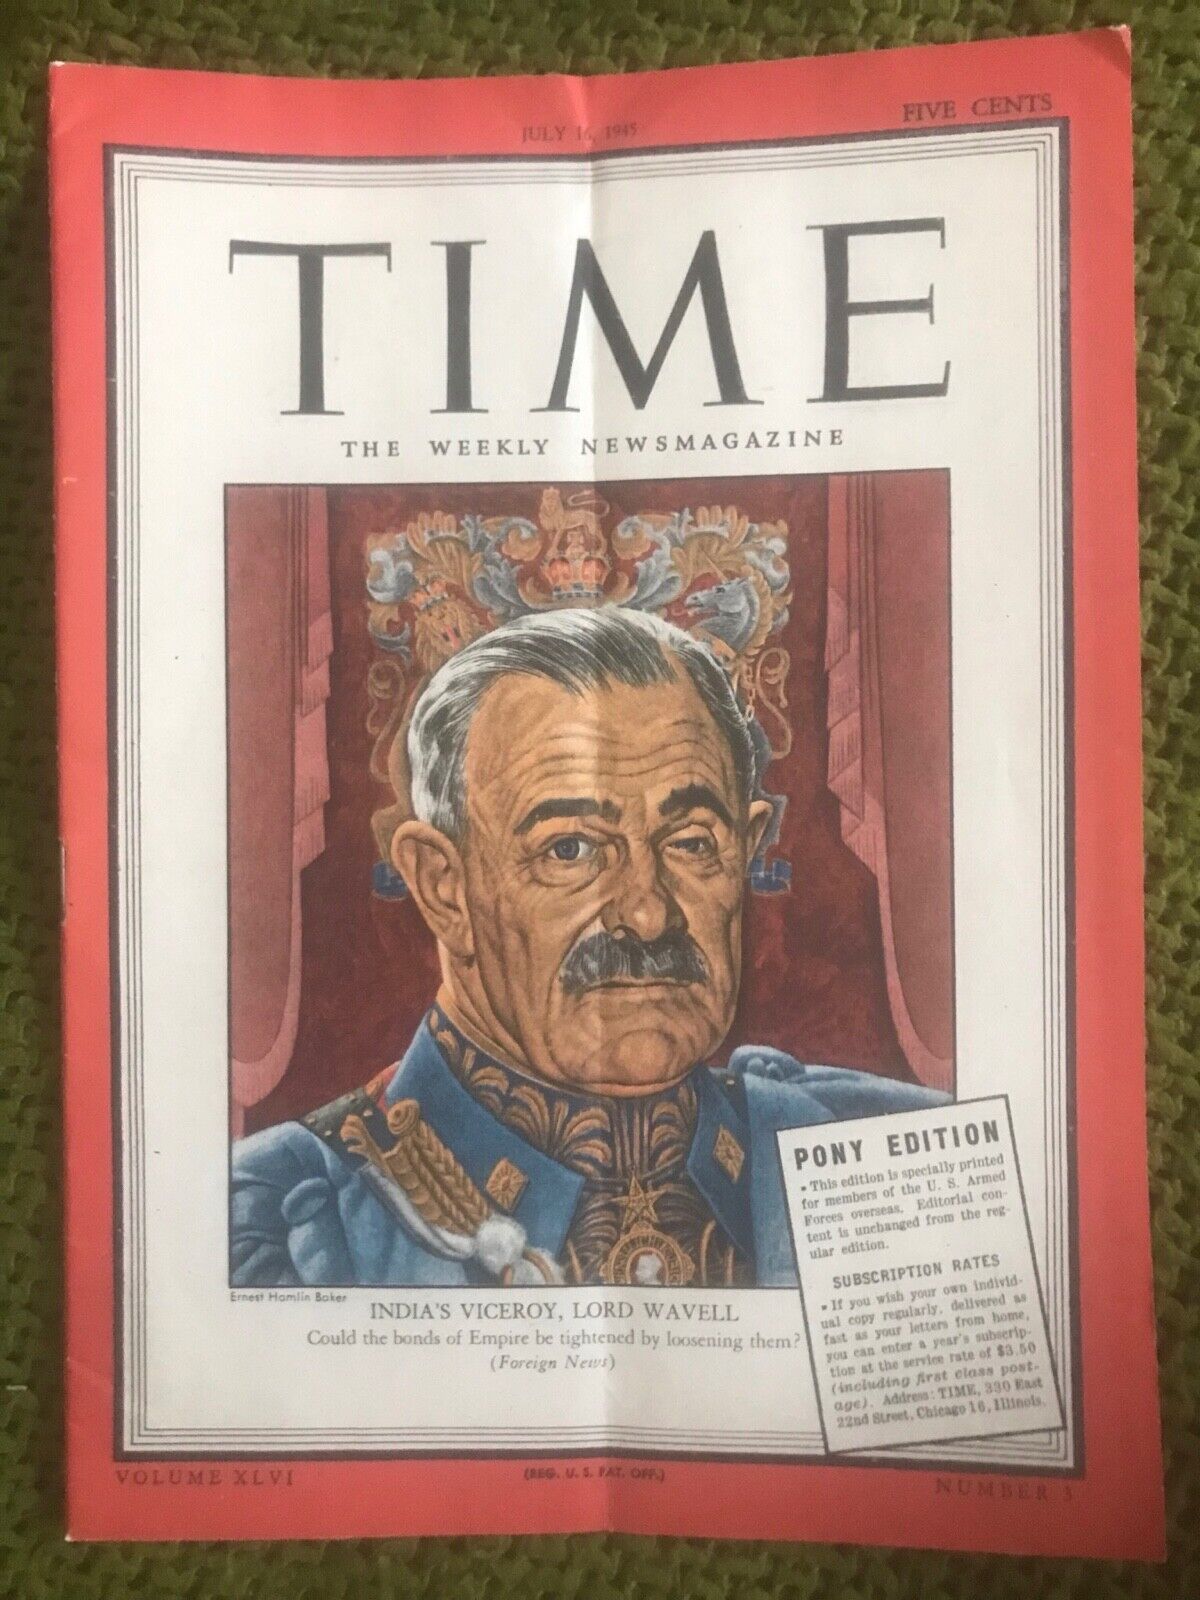 Time Magazine WWII Lord Wavell of India Issue July 14, 1945 Armed Forces Edition